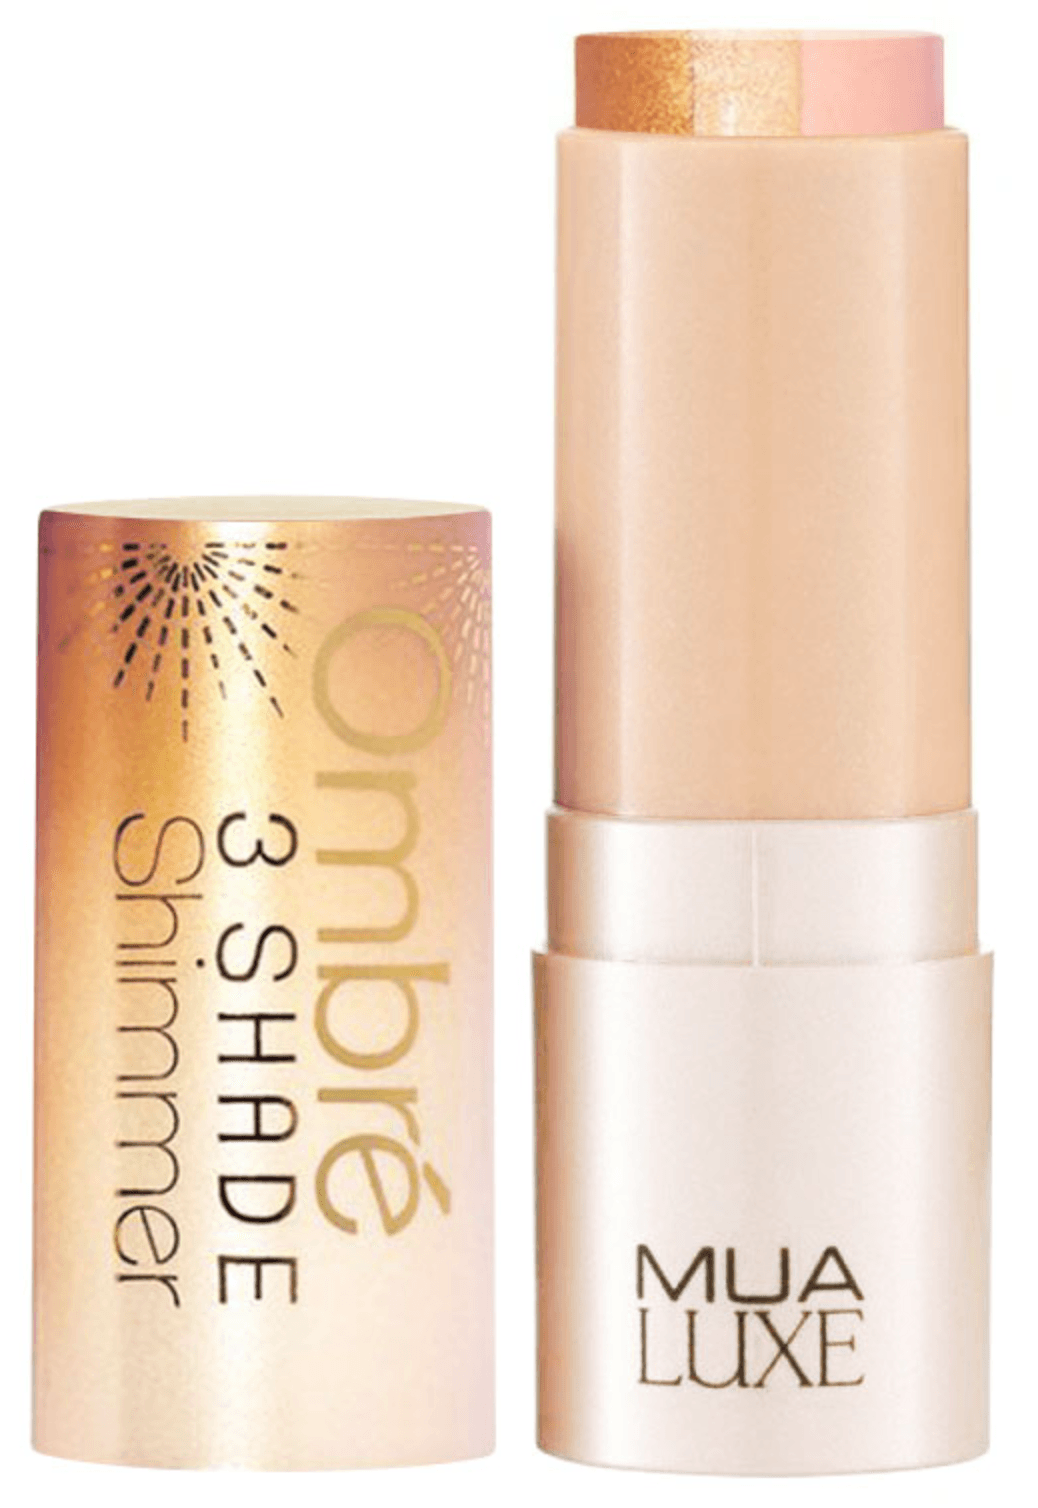 Selected image for MUA Luxe hajlajter Ombre 3 Shade Shimmer Stick